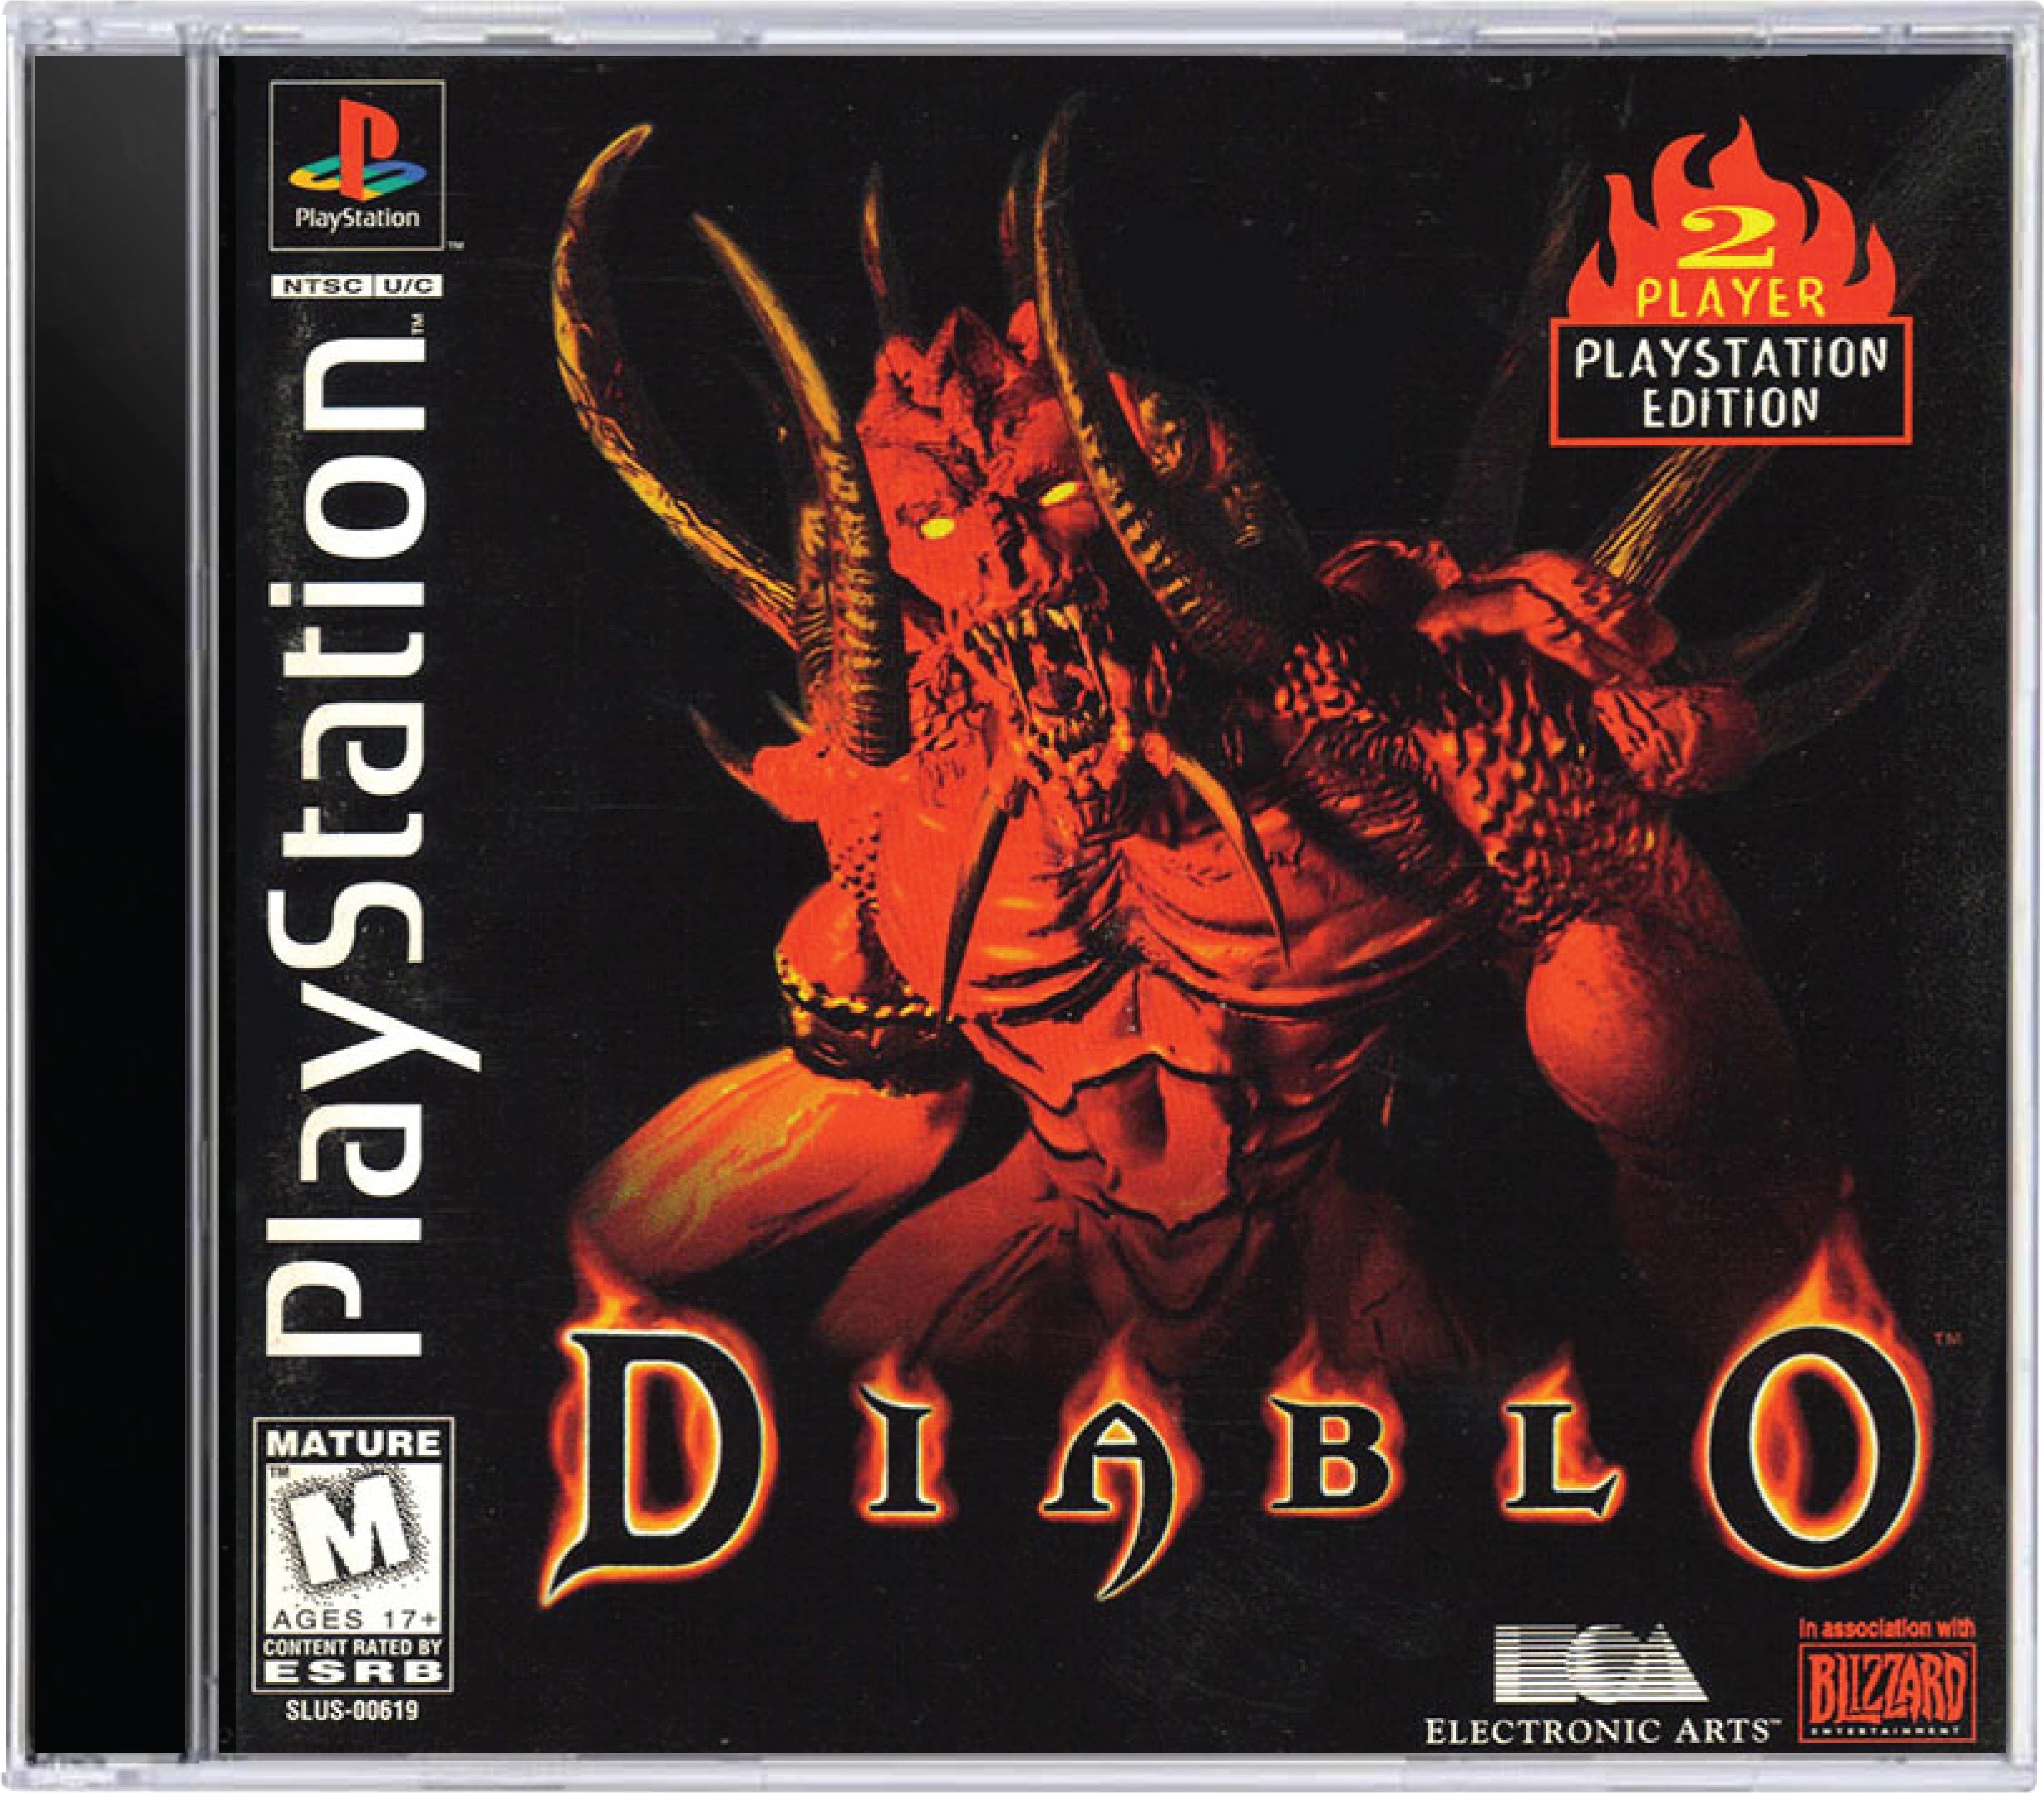 Diablo Cover Art and Product Photo